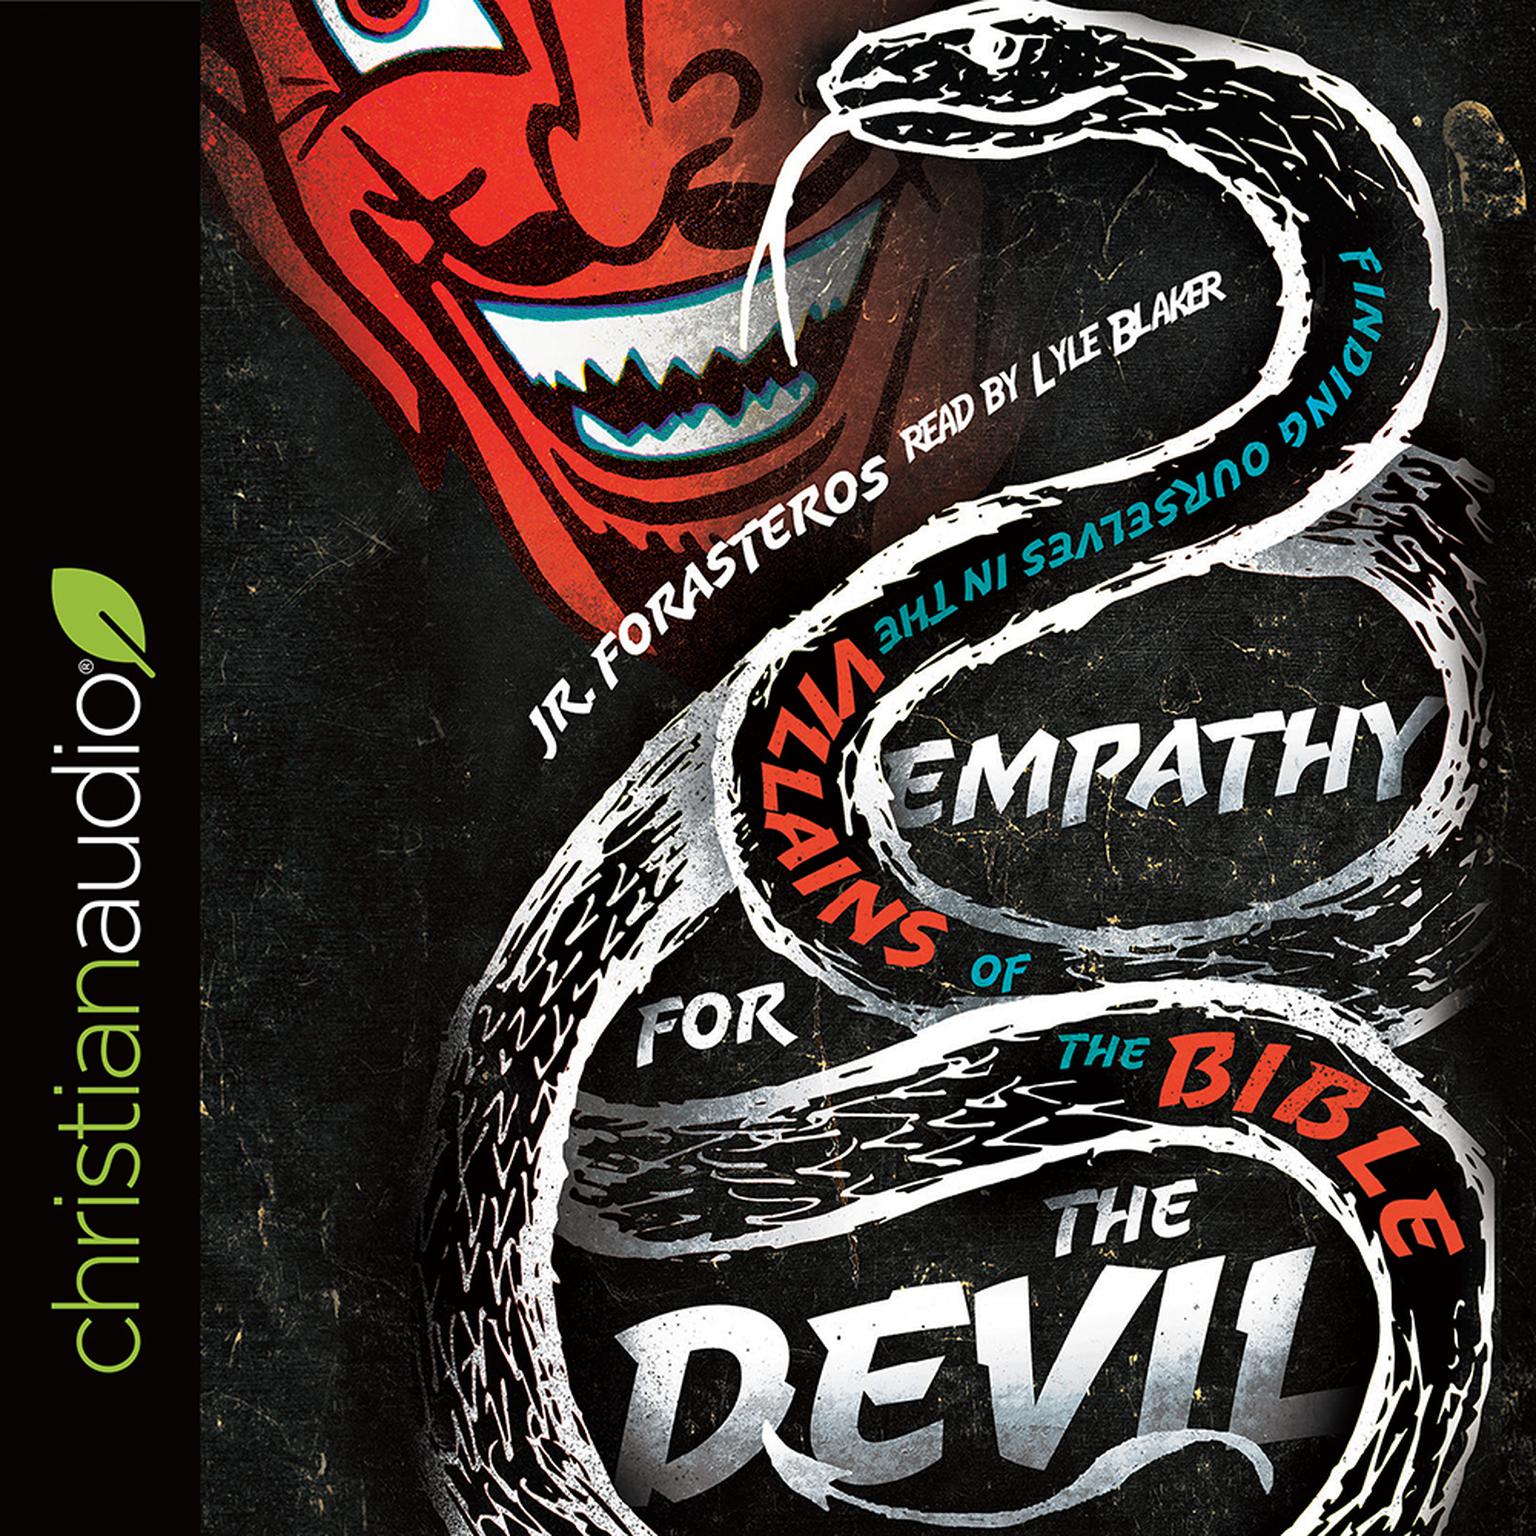 Empathy for the Devil: Finding Ourselves in the Villains of the Bible Audiobook, by JR. Forasteros